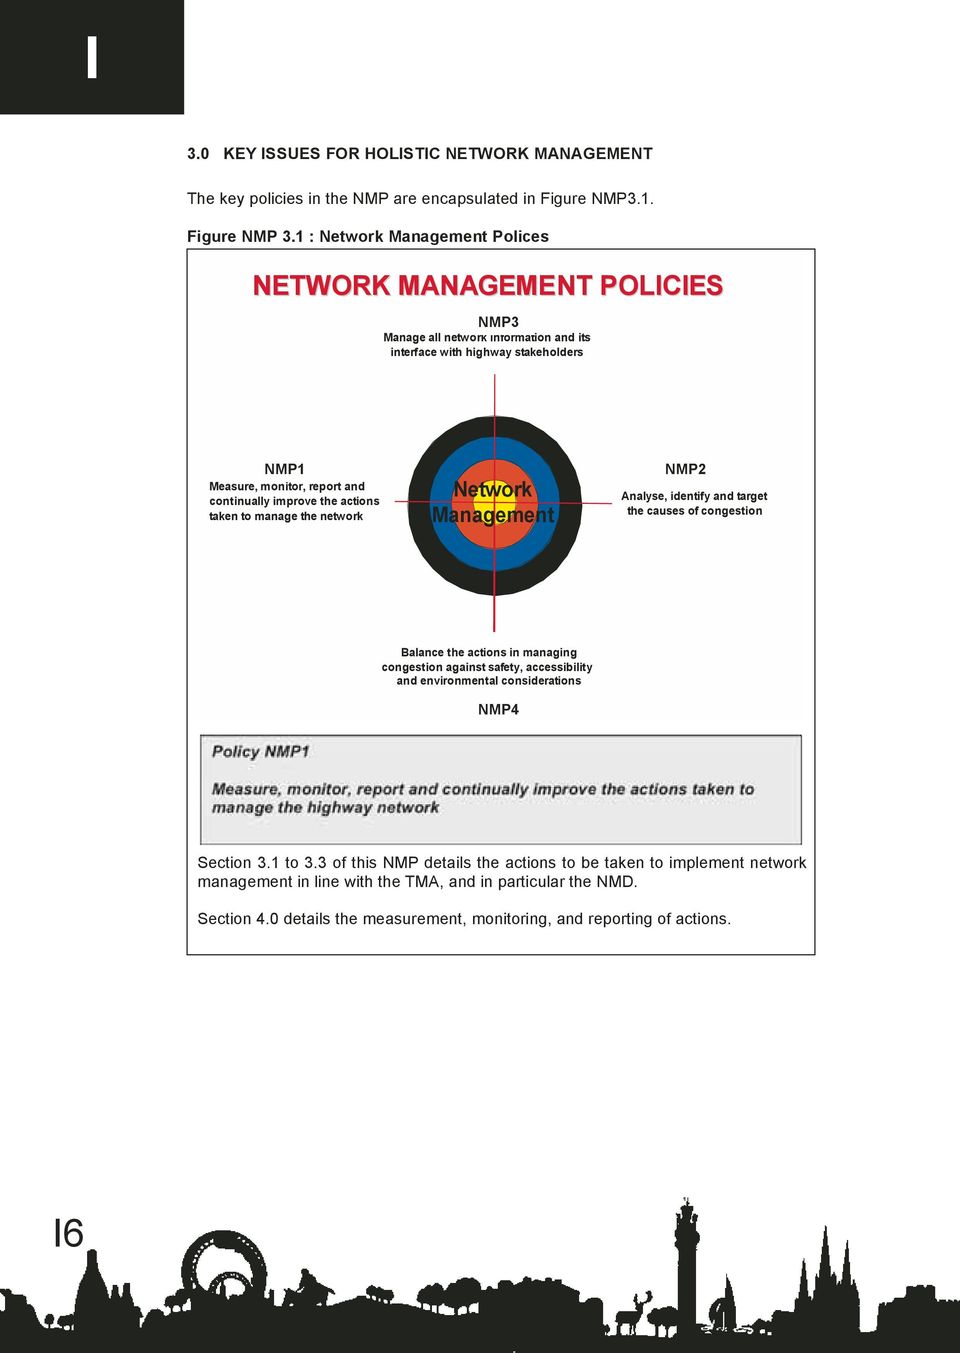 actions taken to manage the network Network Management NMP2 Analyse, identify and target the causes of congestion Balance the actions in managing congestion against safety, accessibility and